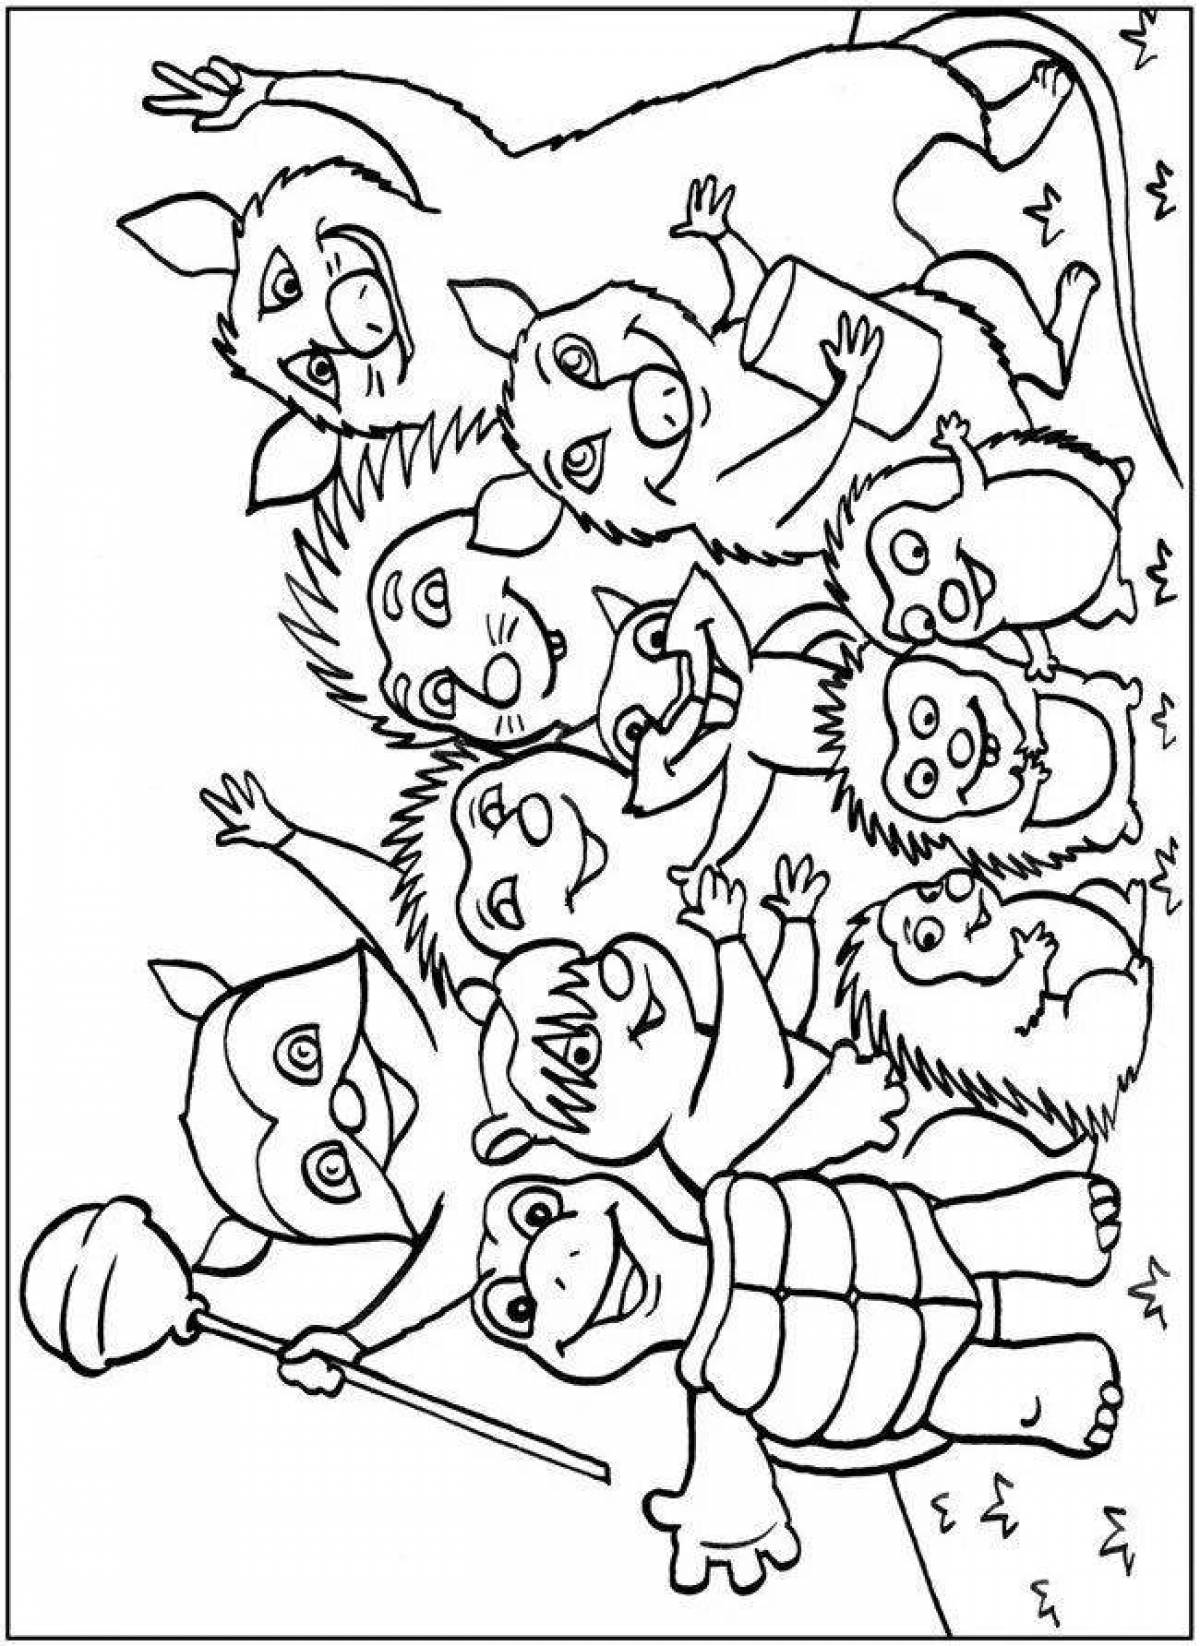 Playful jumble coloring page